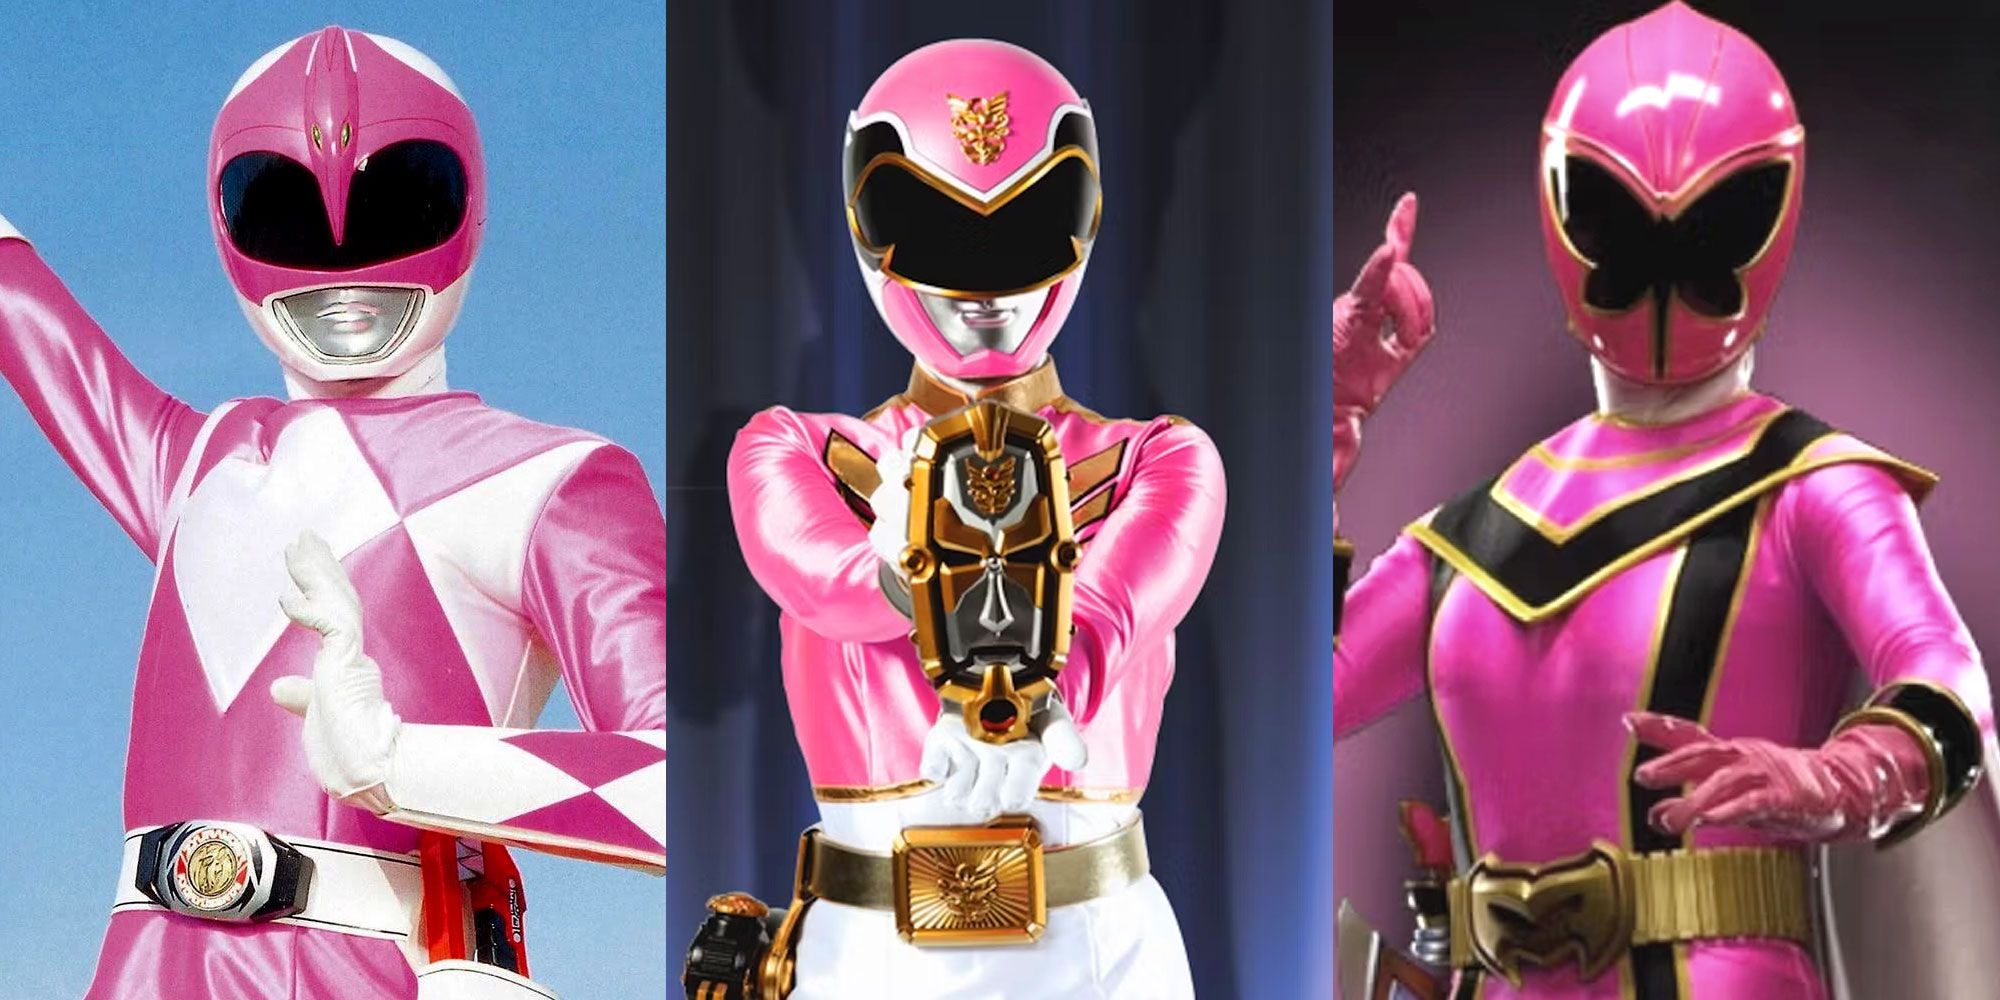 A split image features the Pink Power Rangers from the Mighty Morphin, Megaforce, and Mystic Force series